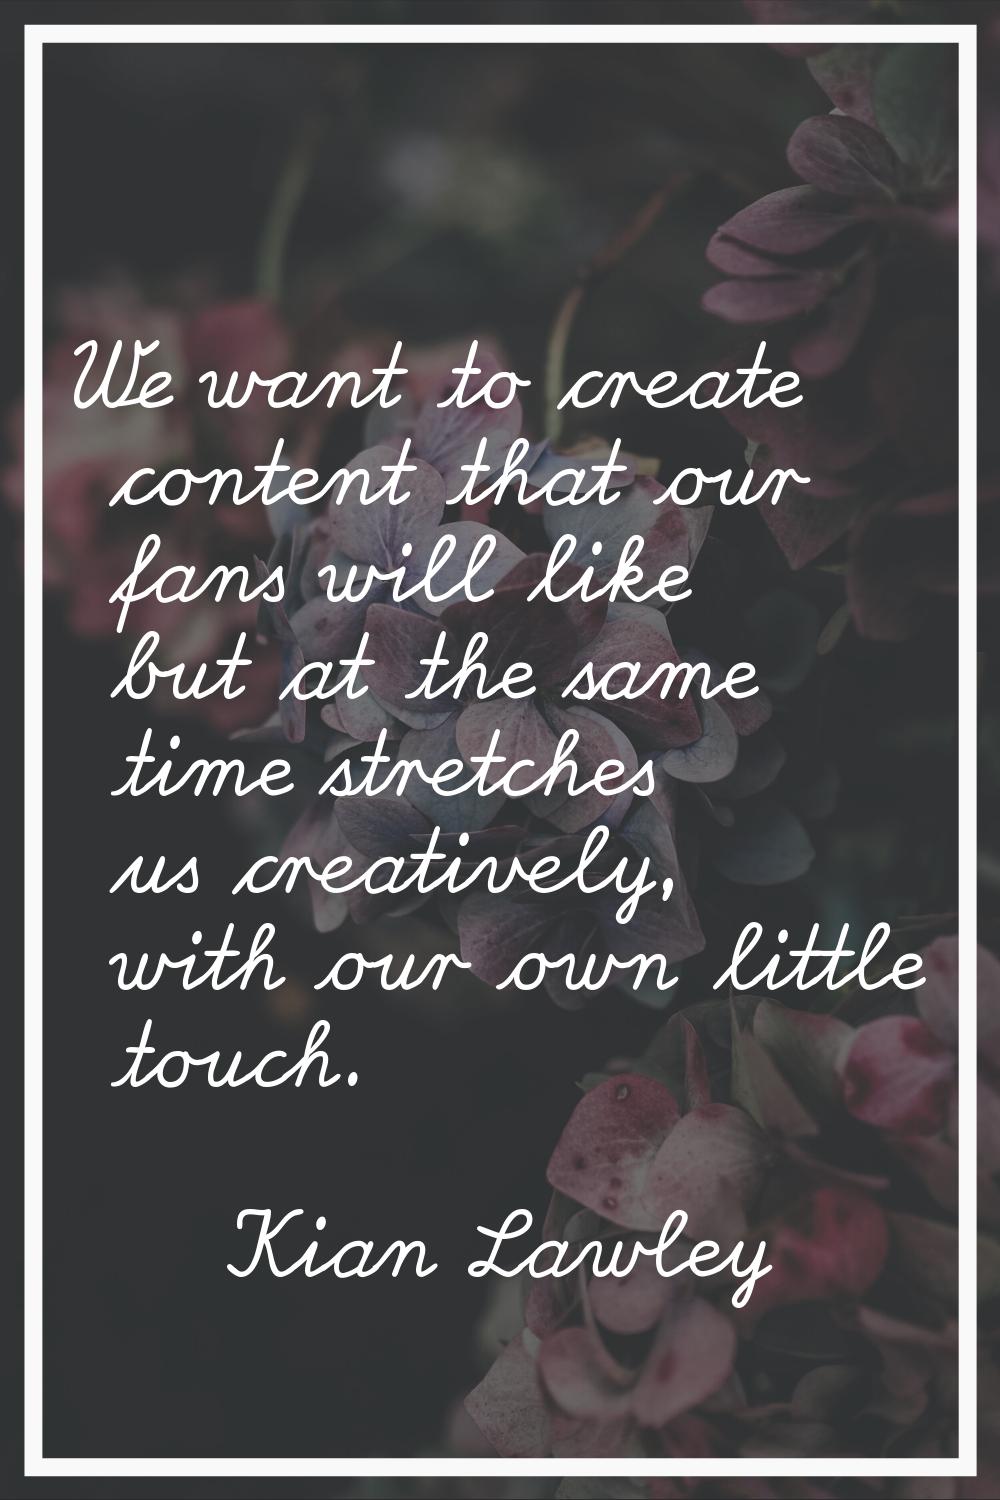 We want to create content that our fans will like but at the same time stretches us creatively, wit